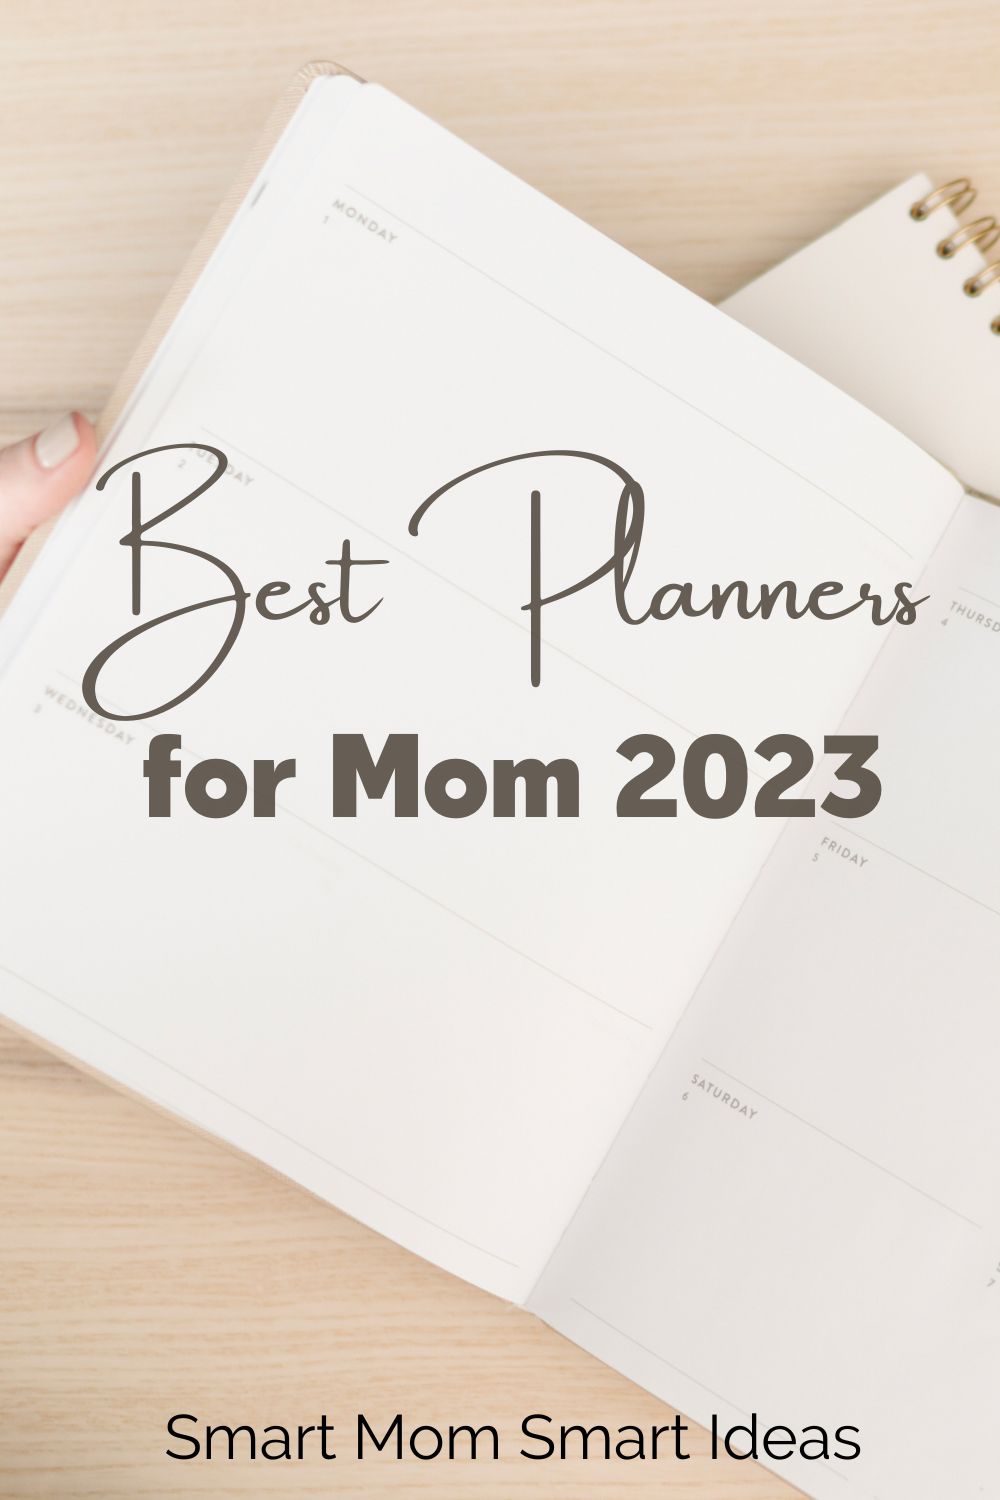 Best planners for mom